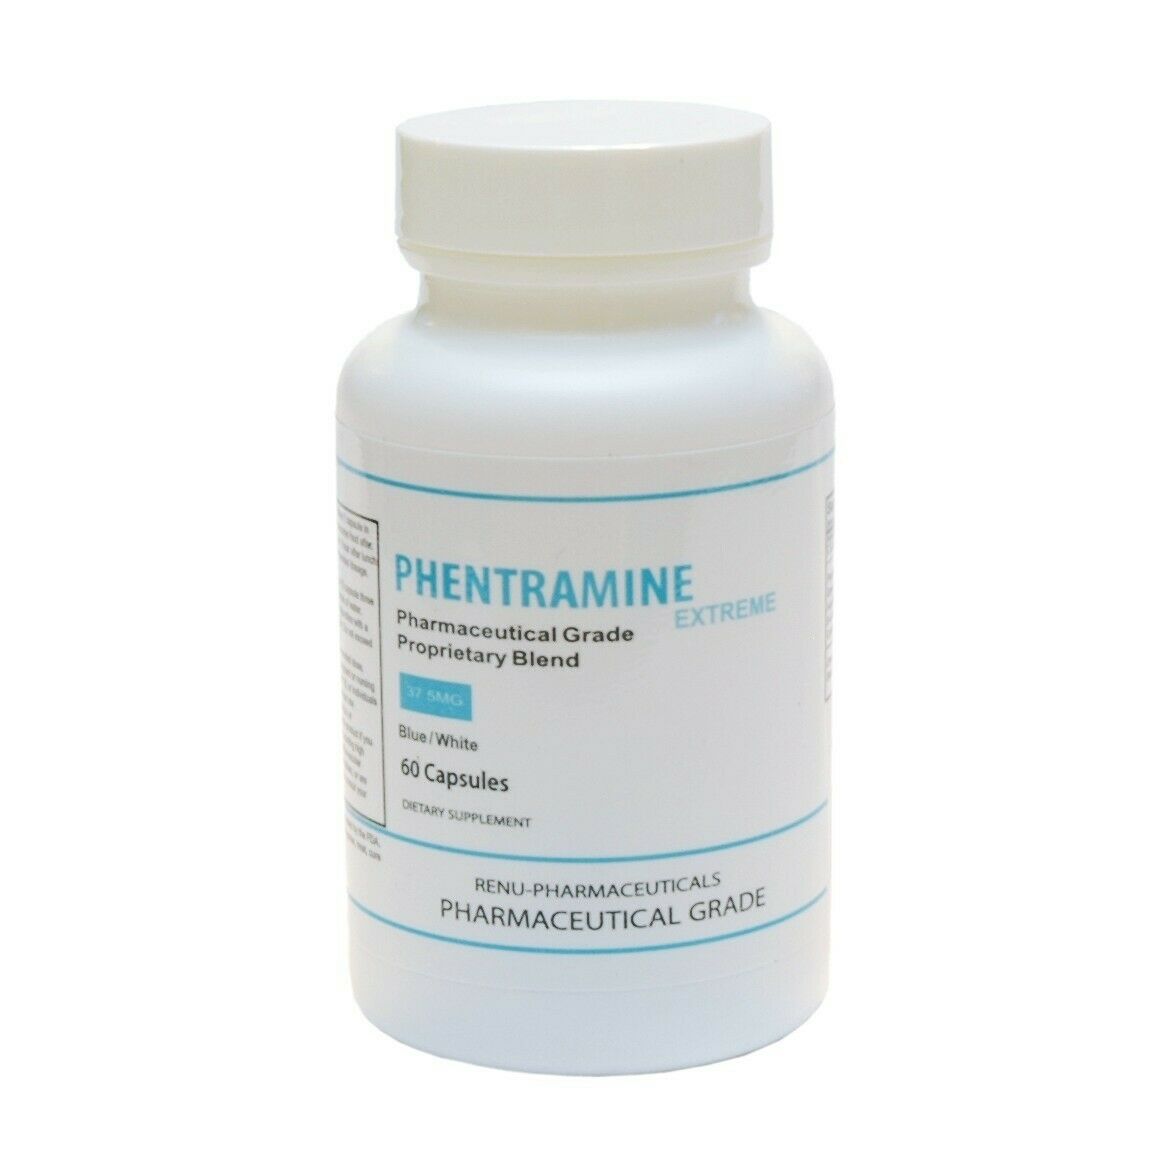 Phentramine Extreme Weight Loss Diet Supplement, 375 Mg, 60 Capsules